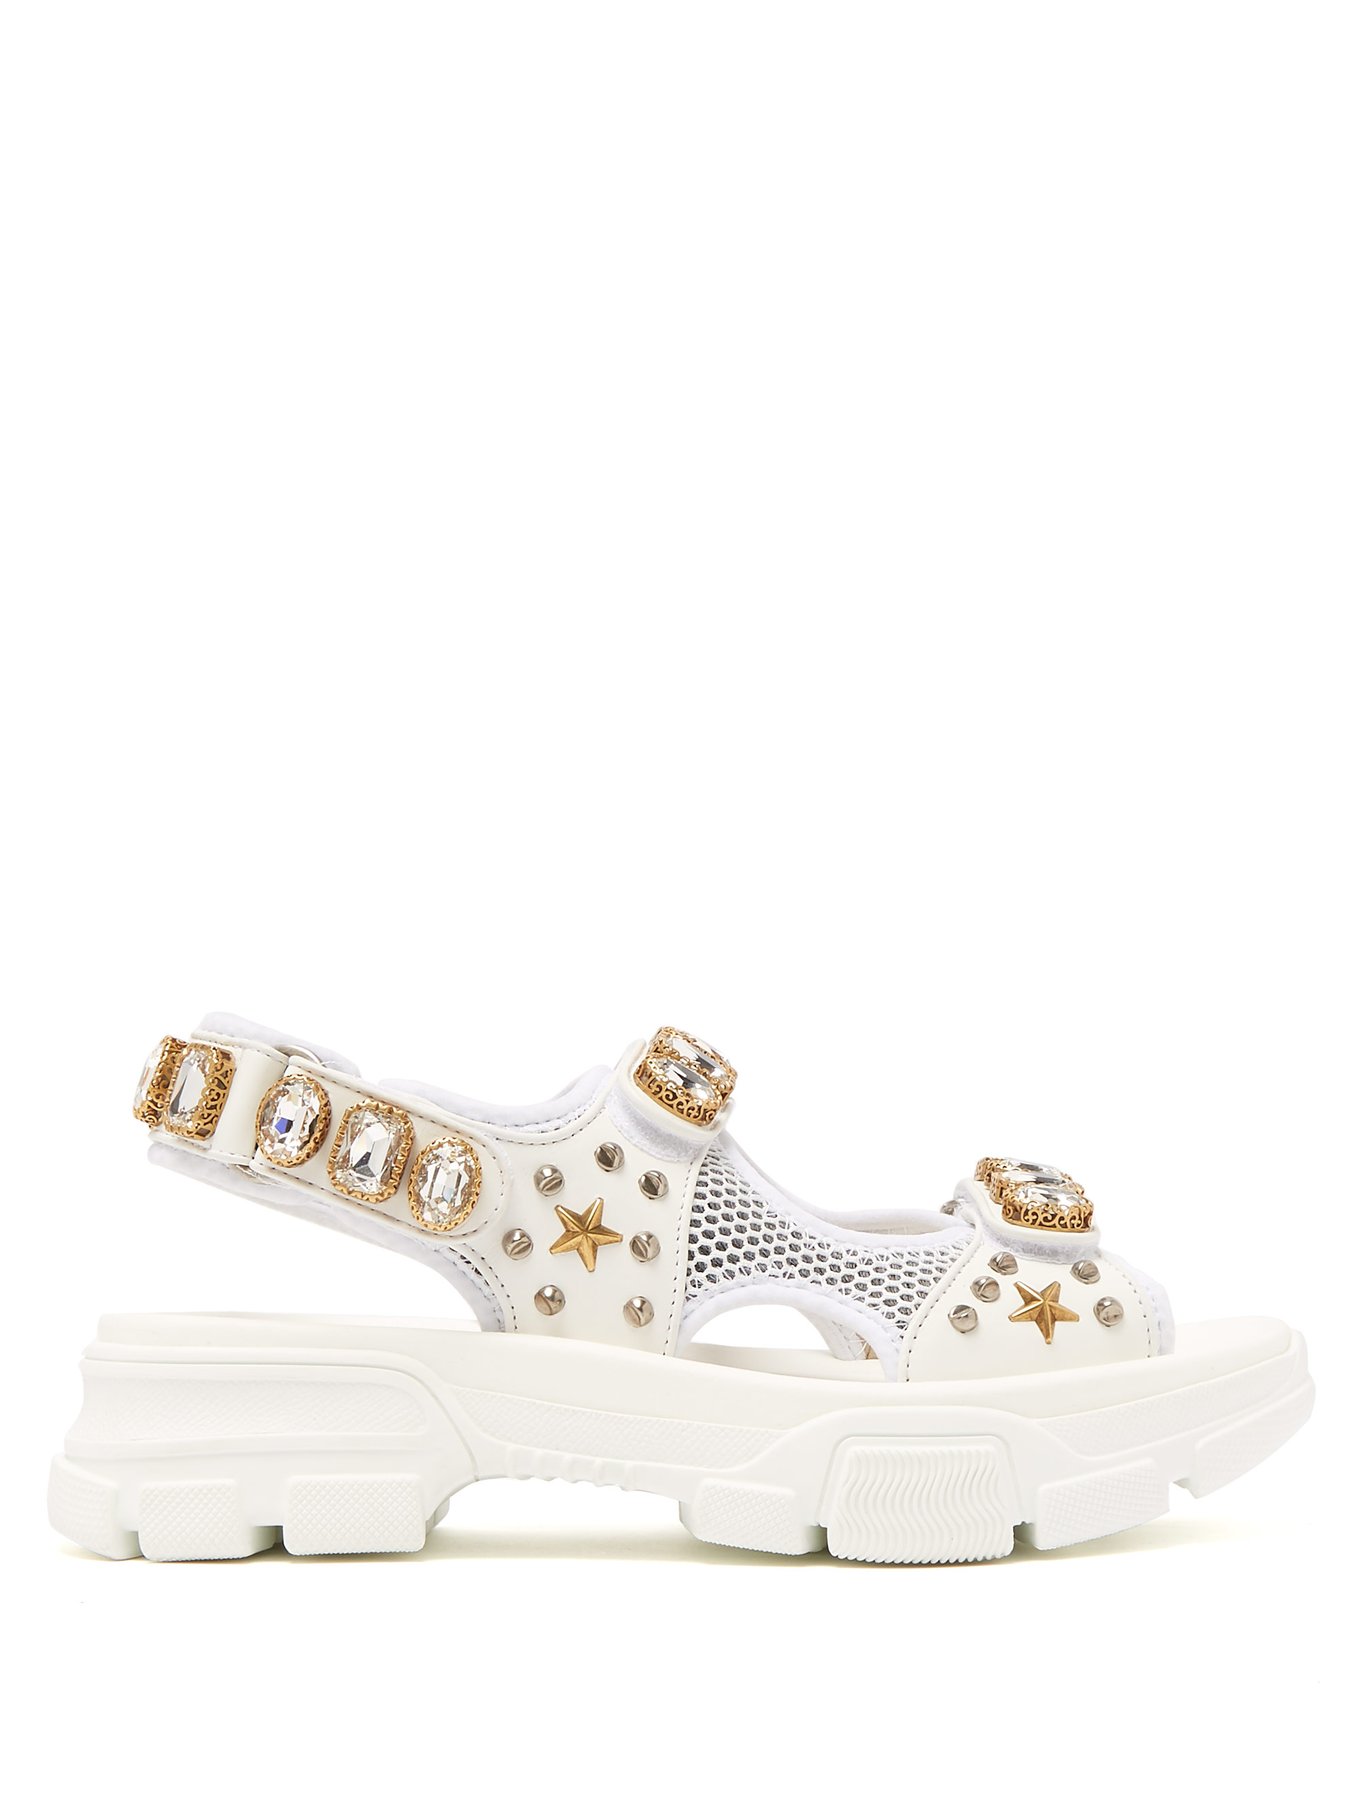 gucci leather and mesh sandal with crystals